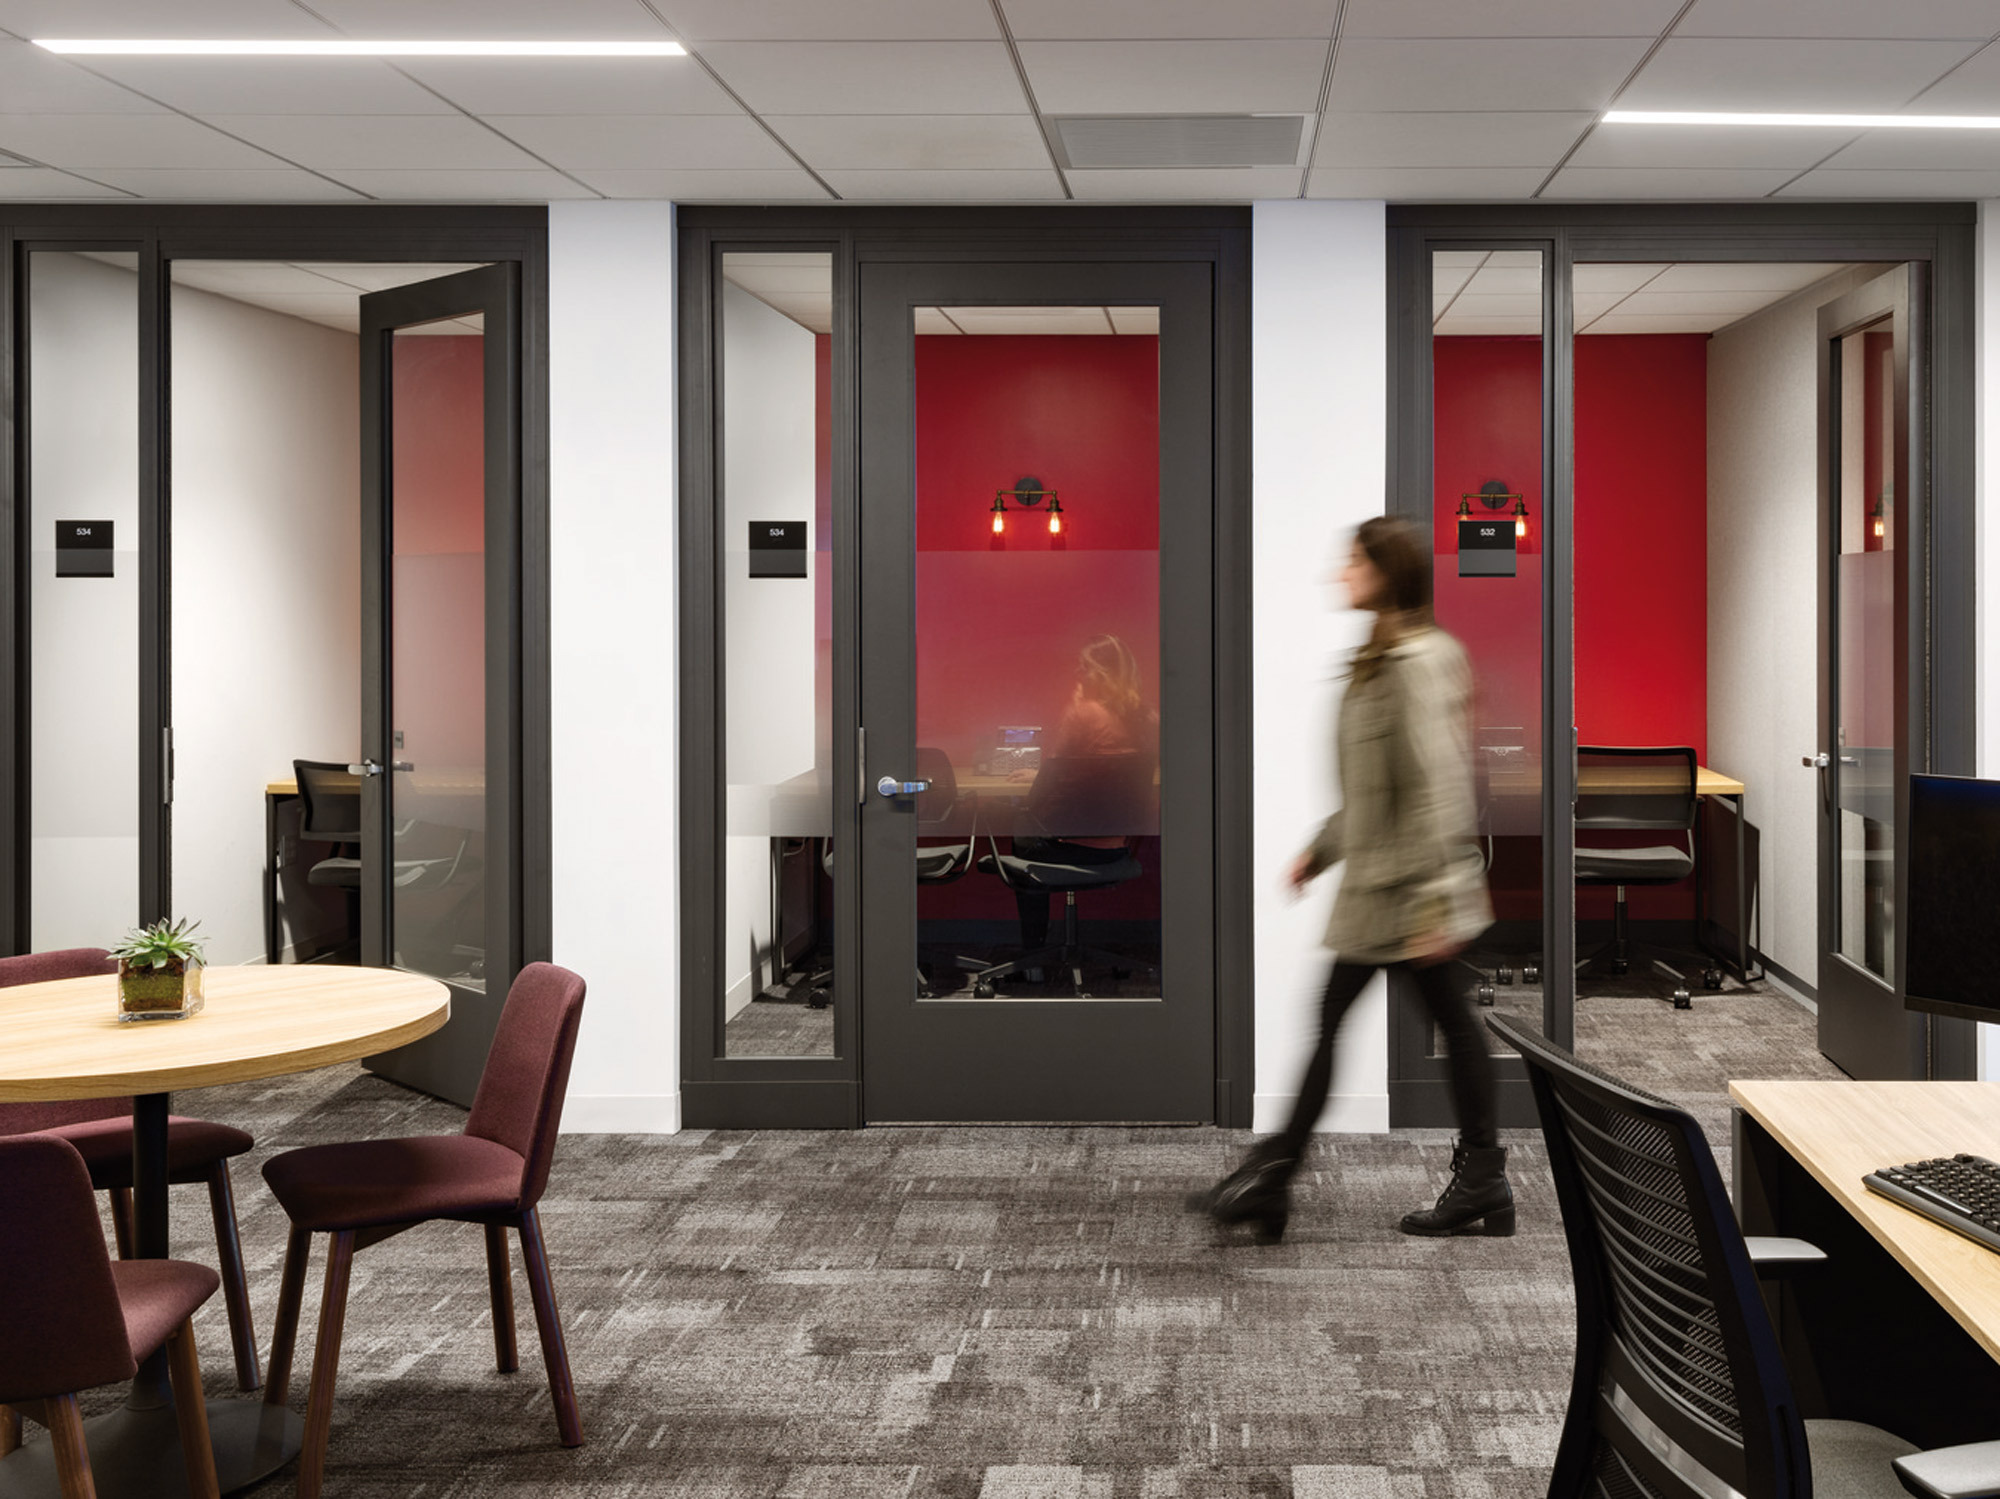 Modern office interior showcasing glass-walled meeting rooms with frosted lower panels for privacy. Red pendant lighting adds a pop of color against neutral tones, while a person in motion suggests a dynamic work environment. Gray carpet and wood accents blend professionalism with comfort.